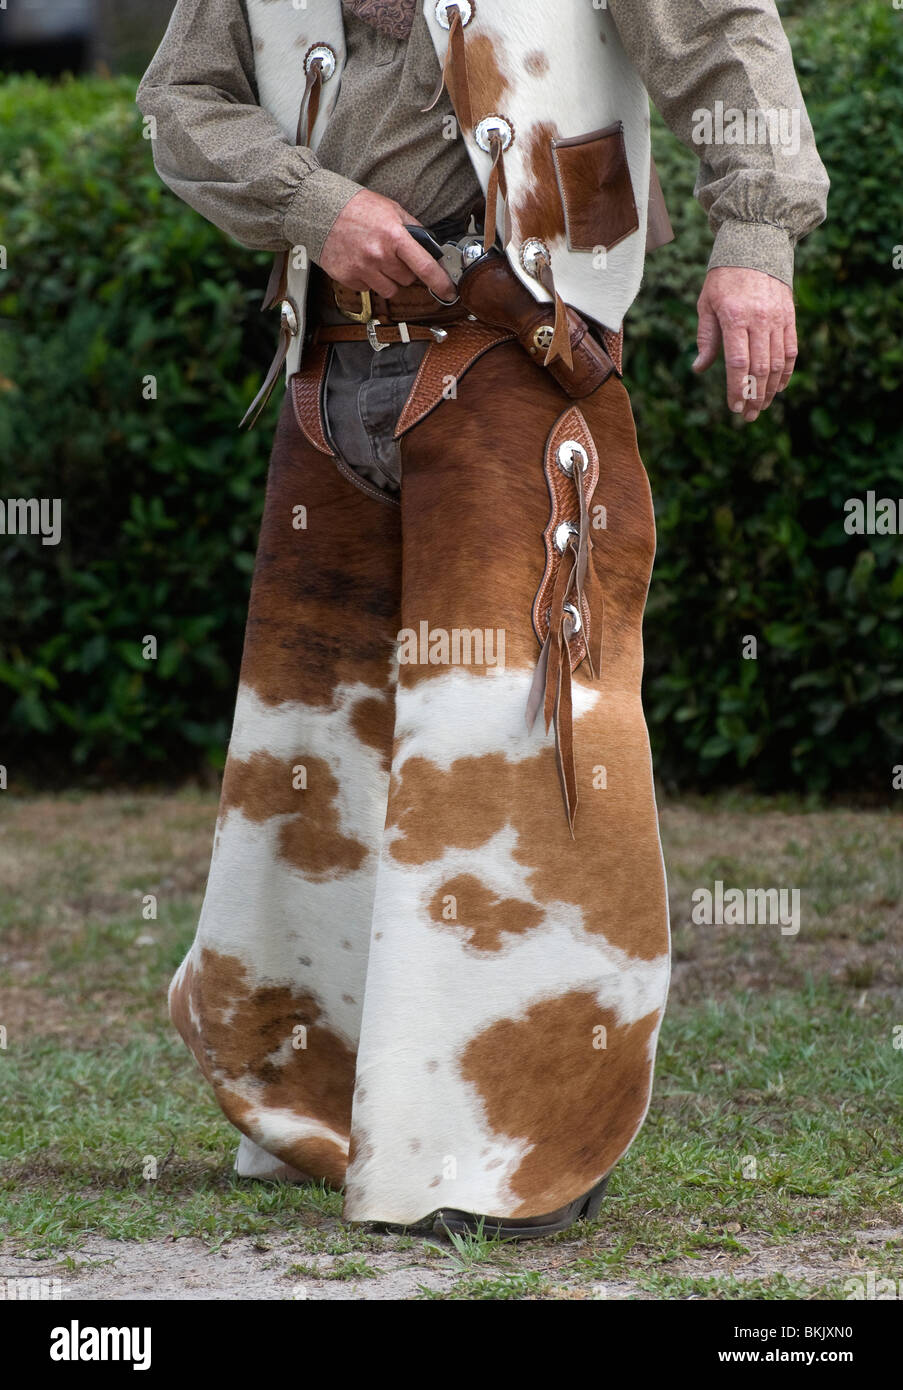 Cowboy re Enactor im westlichen Outfit voller Tatendrang an Pioneer Tage High Springs Florida Stockfoto